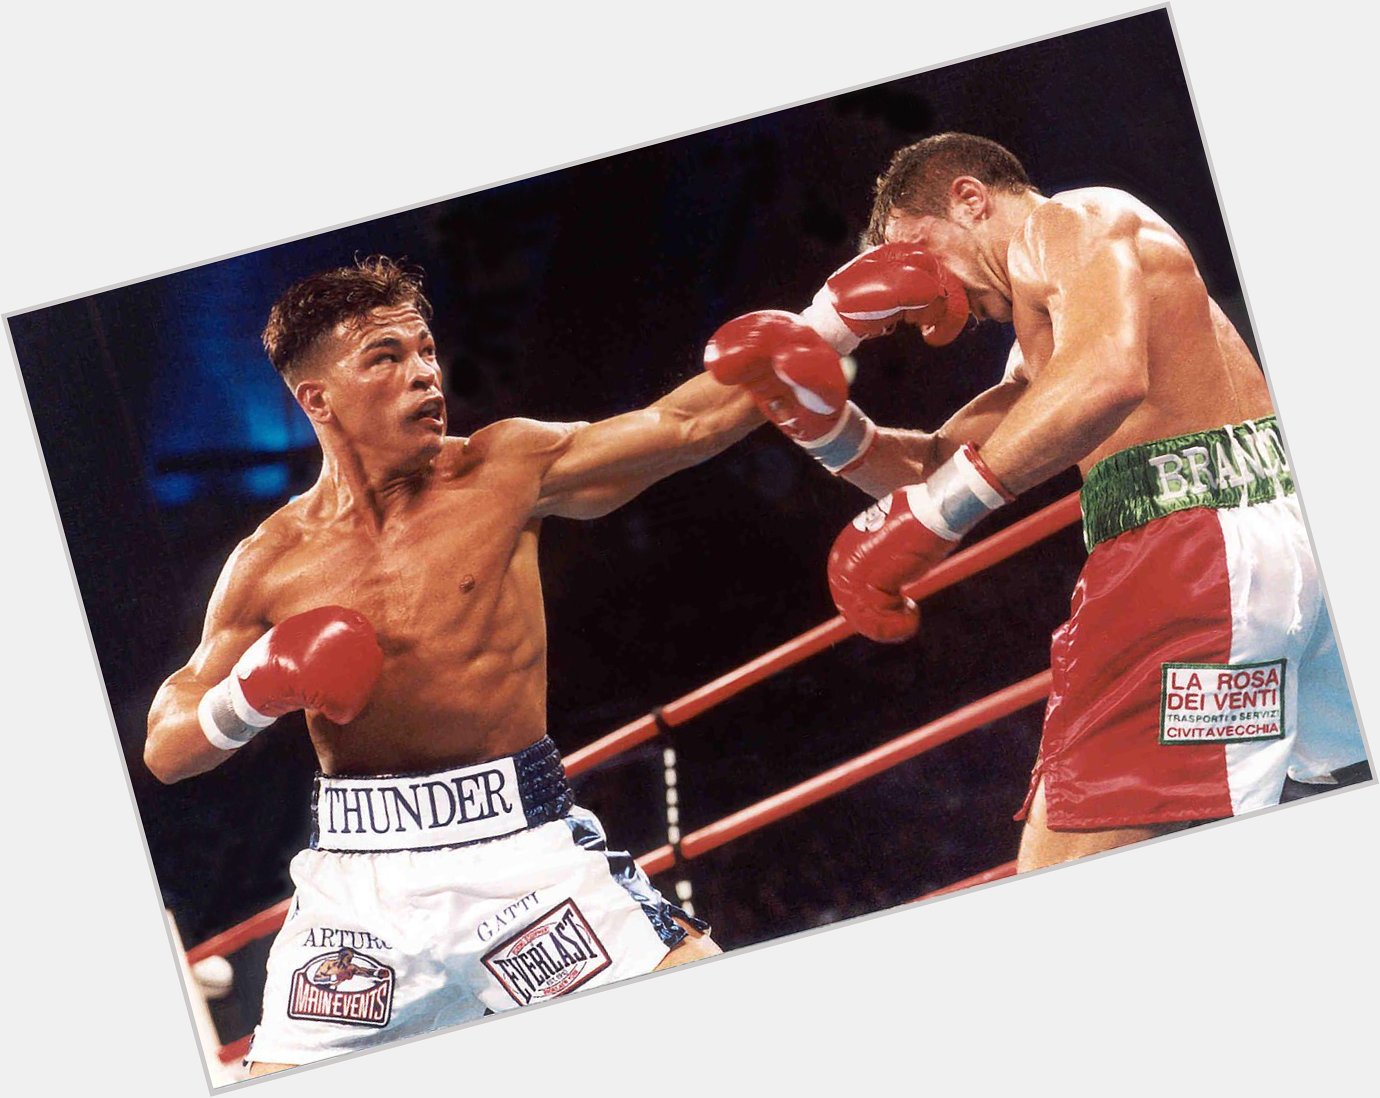 Happy Birthday to Arturo Gatti, who would have turned 43 today! 